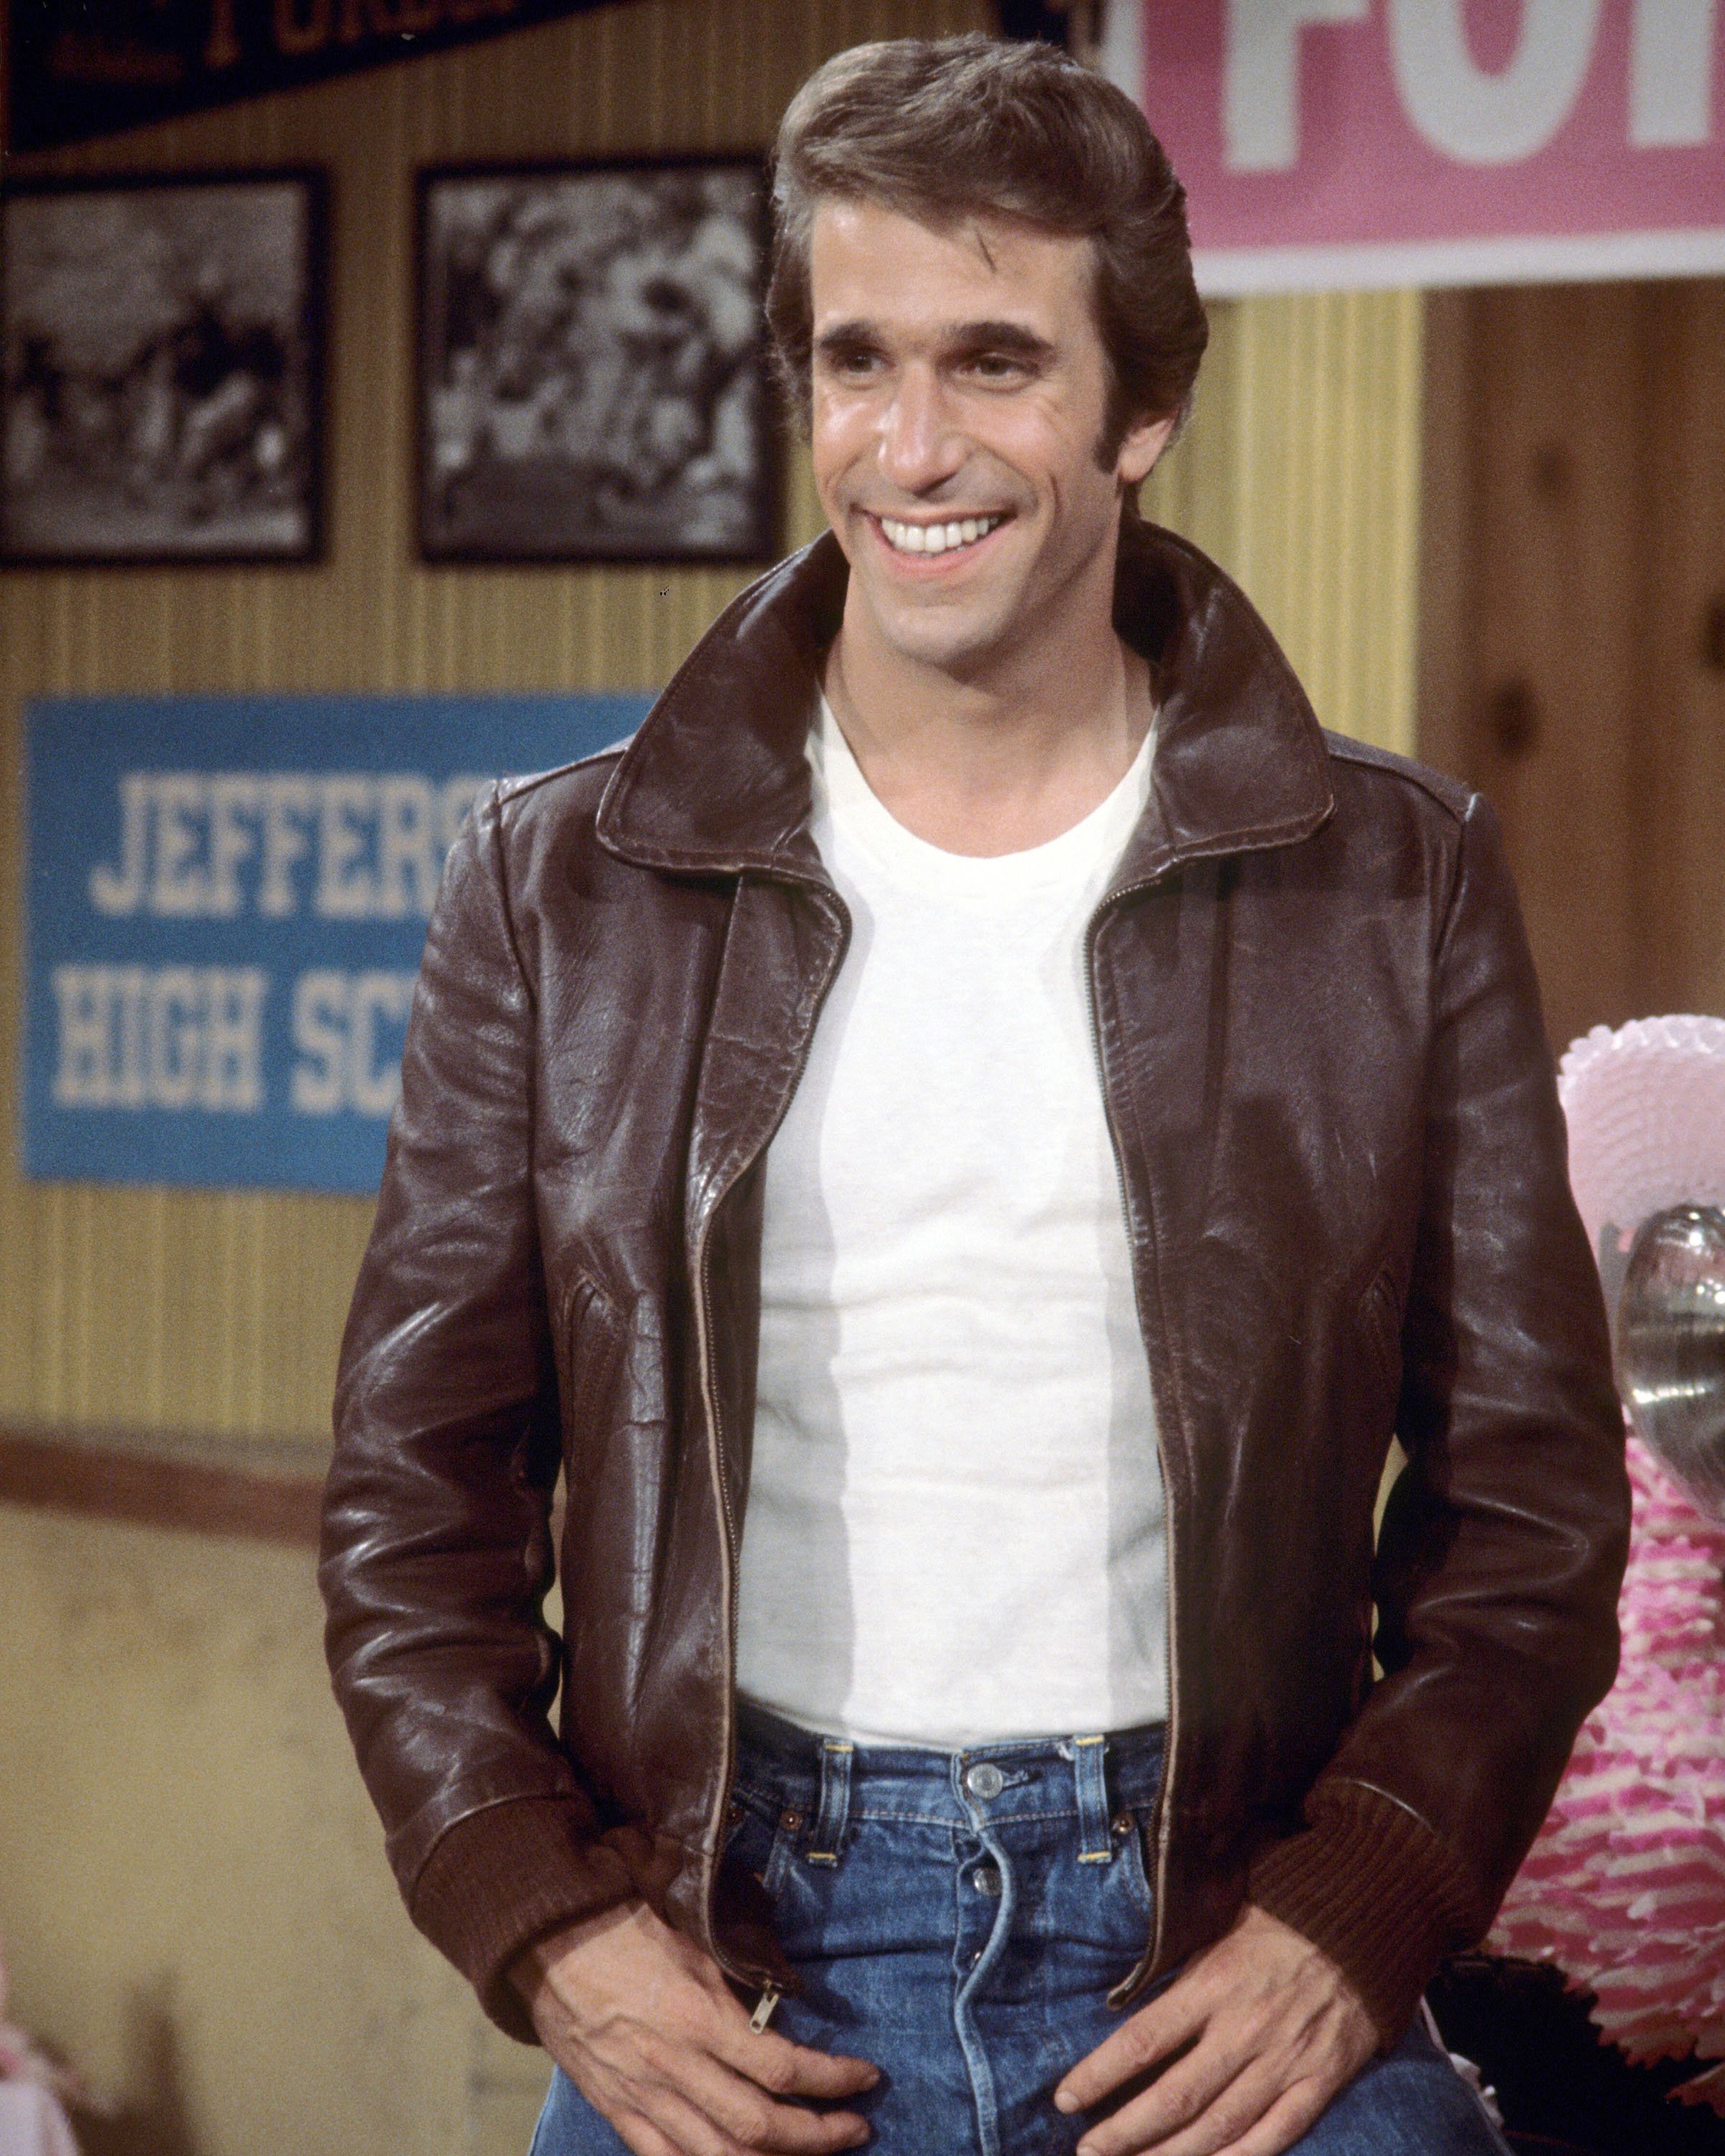 Henry Winkler on "Happy Days" circa 1977 | Source: Getty Images